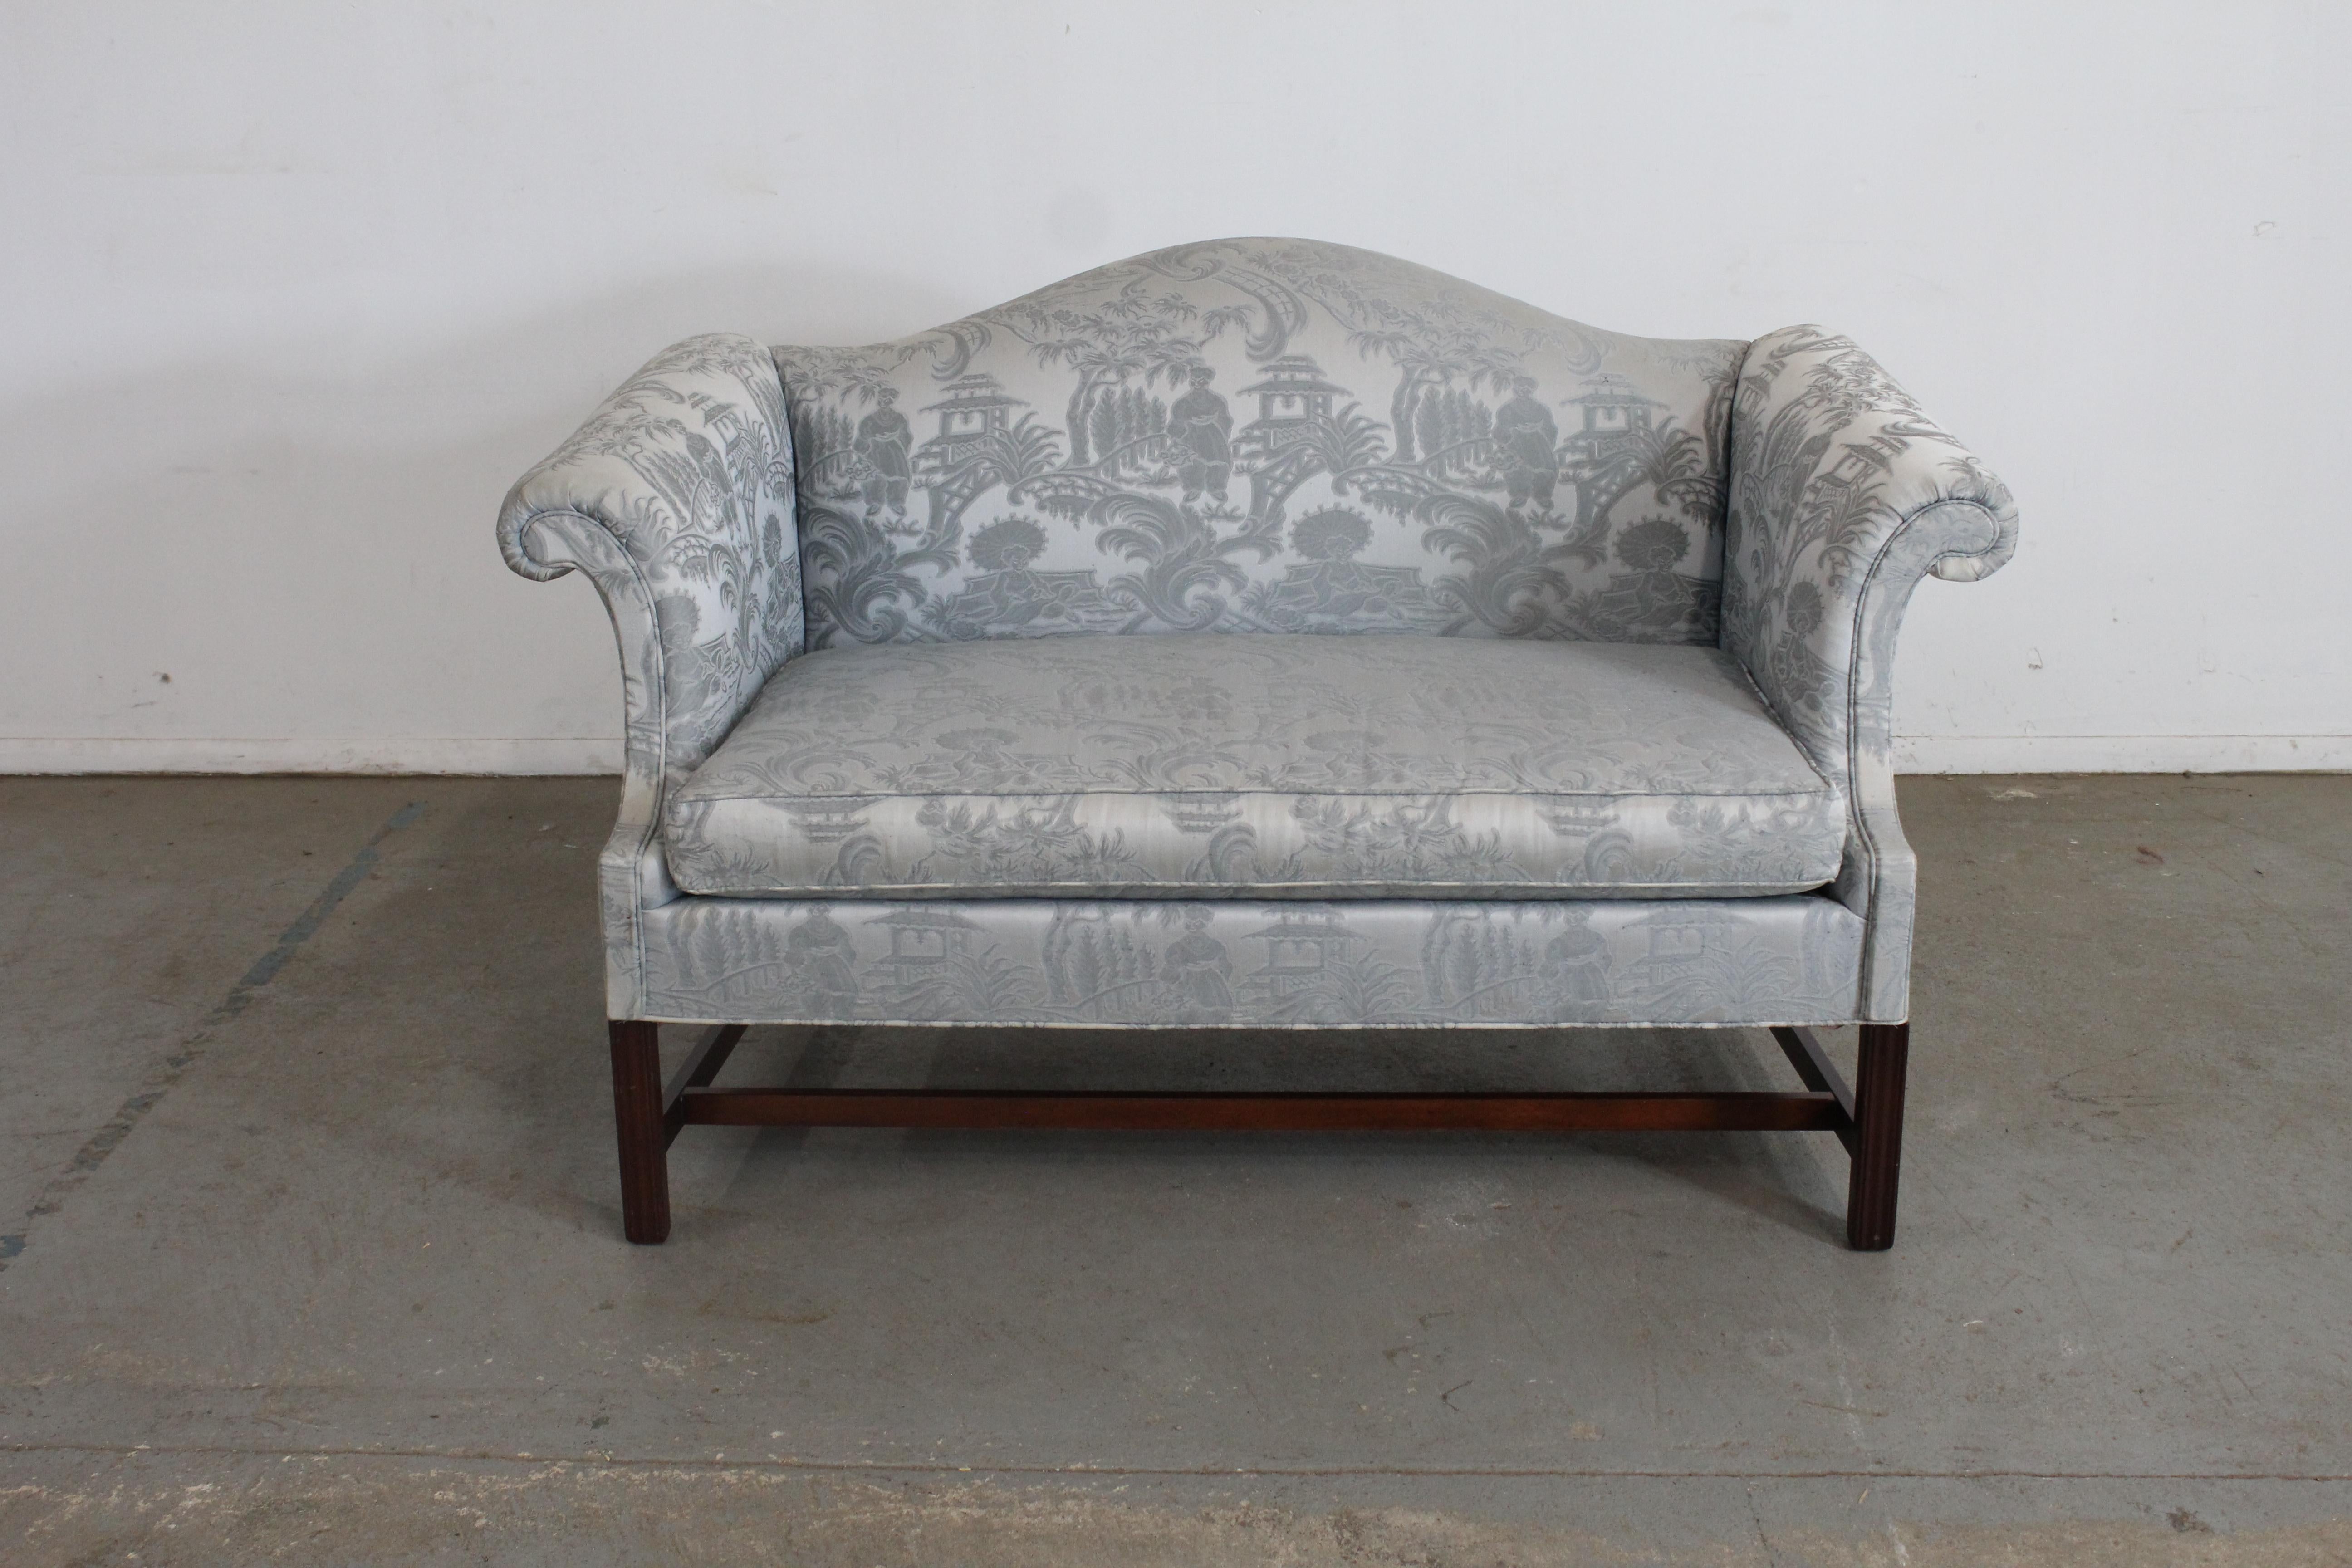 Vintage Chippendale Chinese Camelback Love Seat/Sofa by Hickory Chair Co

Offered is a beautiful  Chippendale Reproduction Camelback Sofa by Hickory Chair Co. The sofa has a great look with nice lines, design, and look.  The sofa features straight